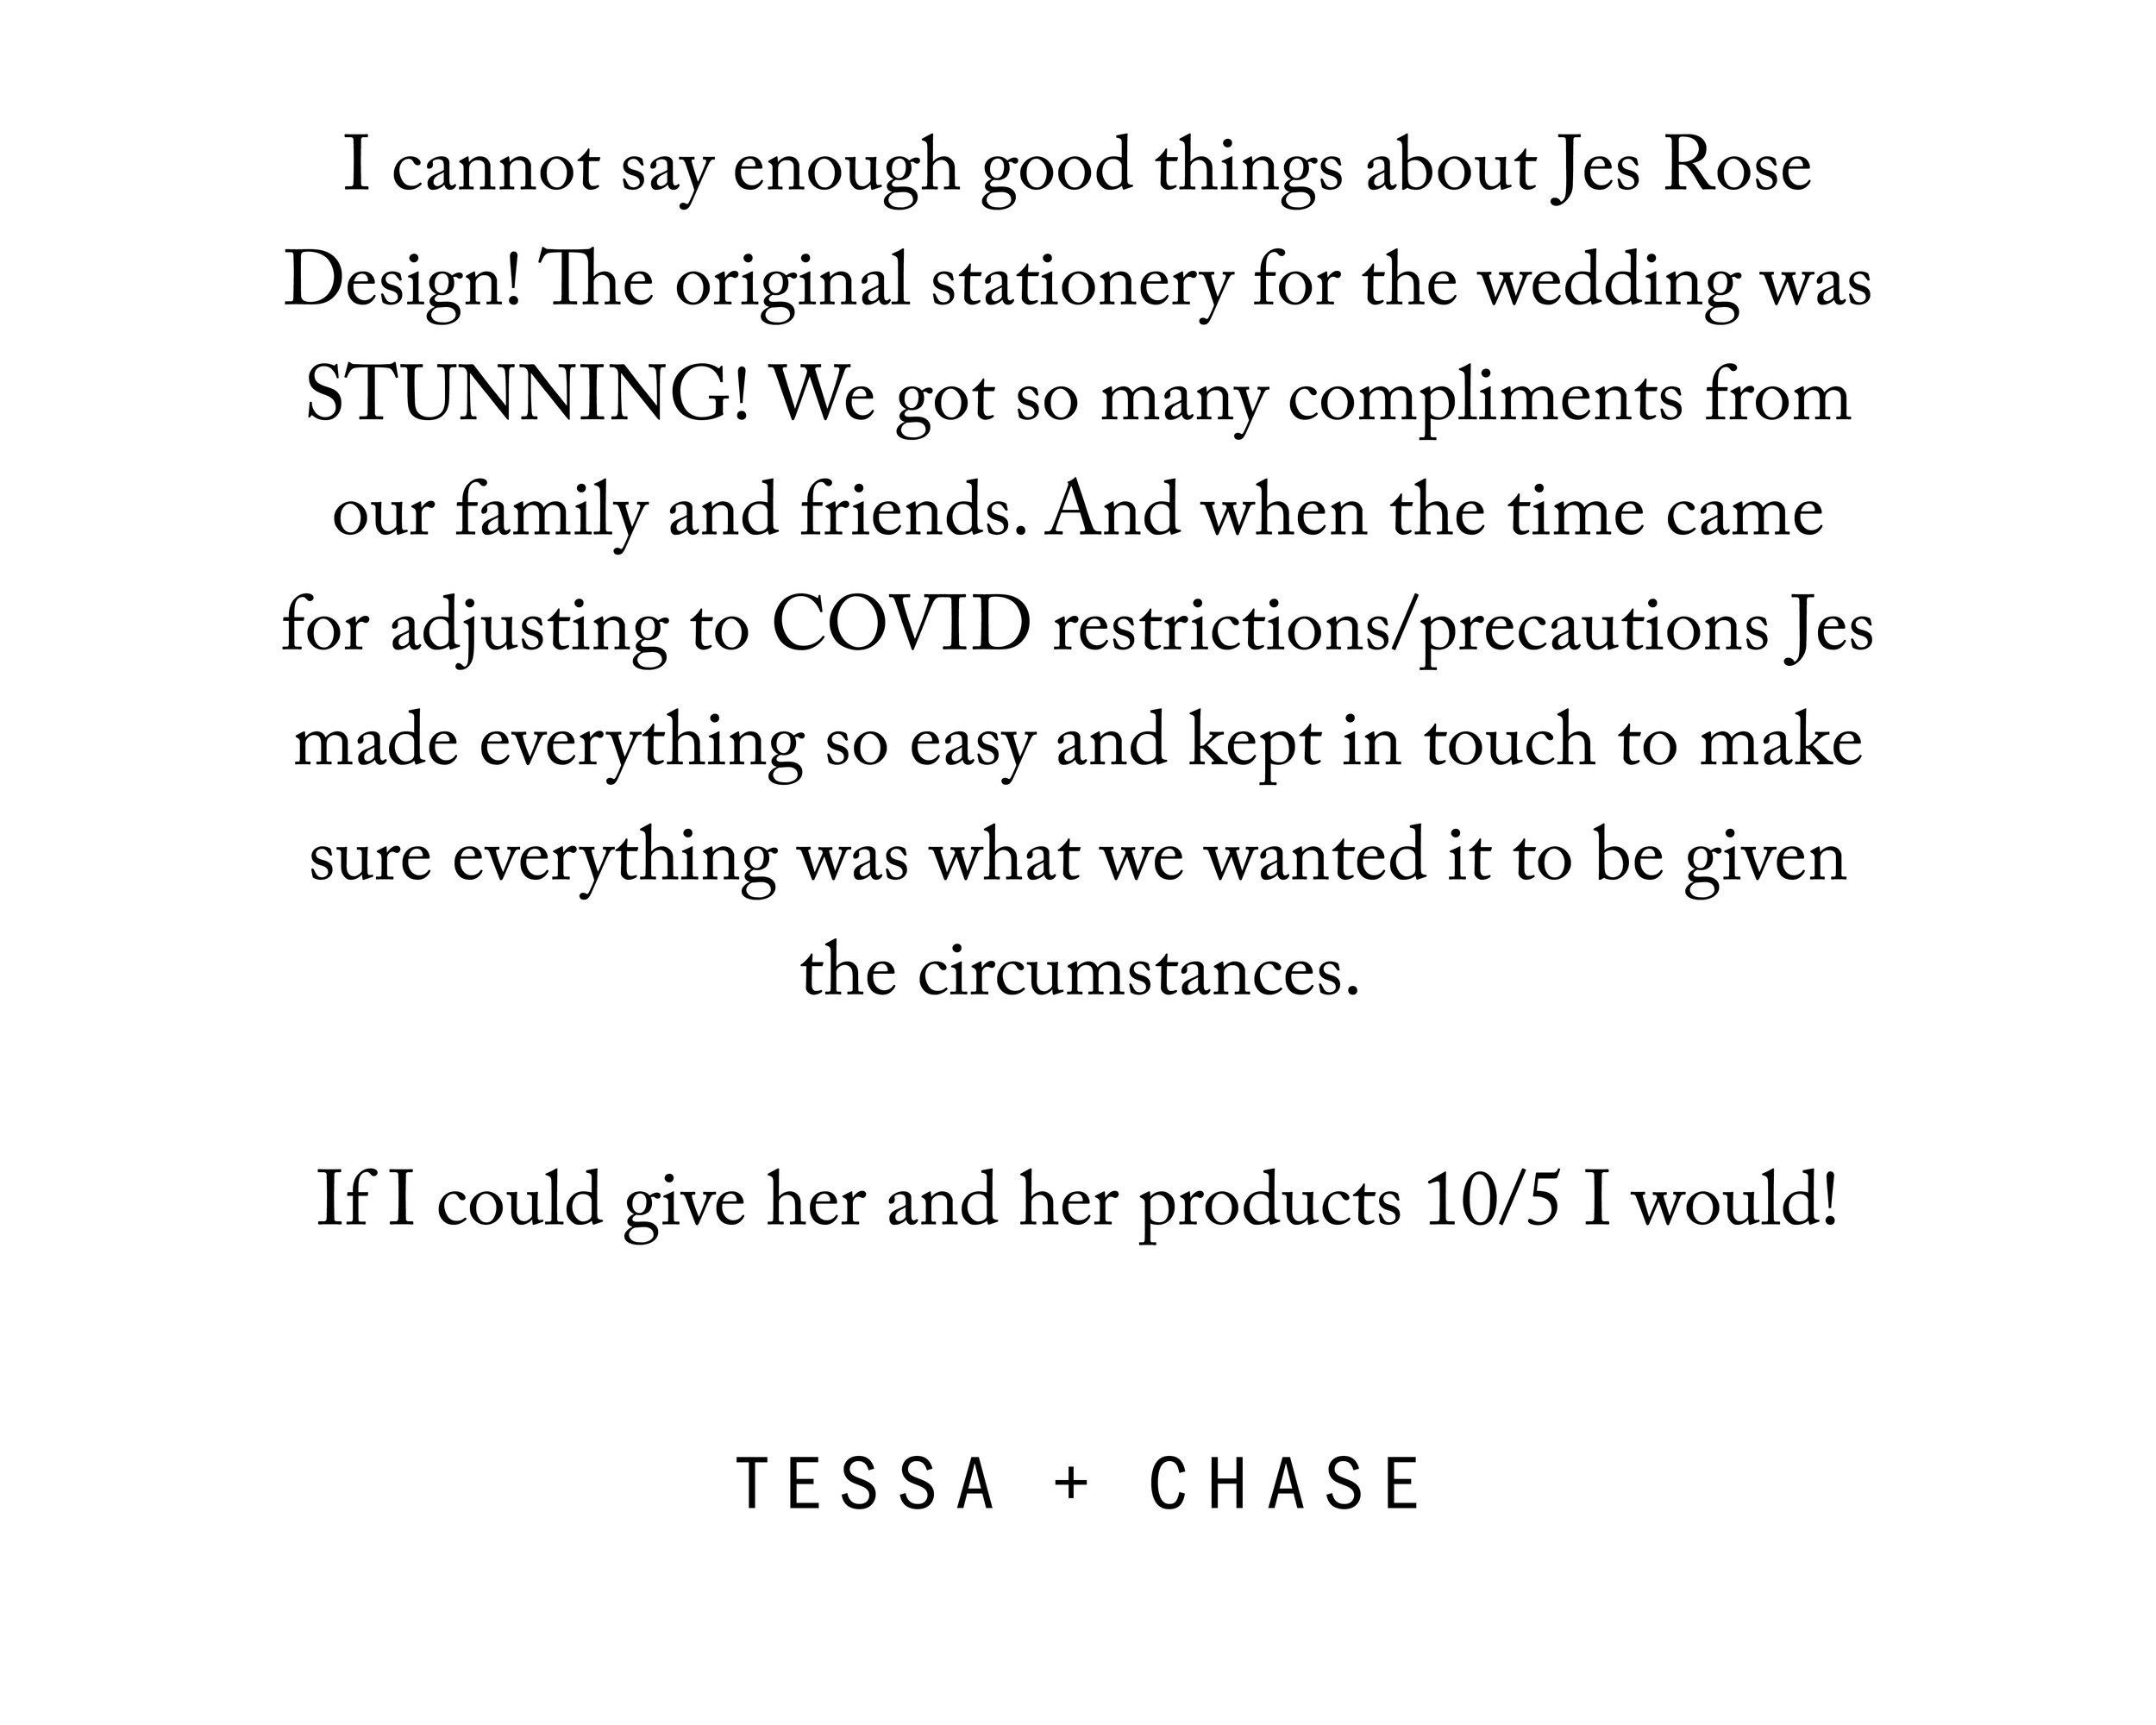  I cannot say enough good things about Jes Rose Design! The original stationary for the wedding was STUNNING! We got so many compliments from our family and friends. And when the time came for adjusting to COVID restrictions/precautions Jes made ever